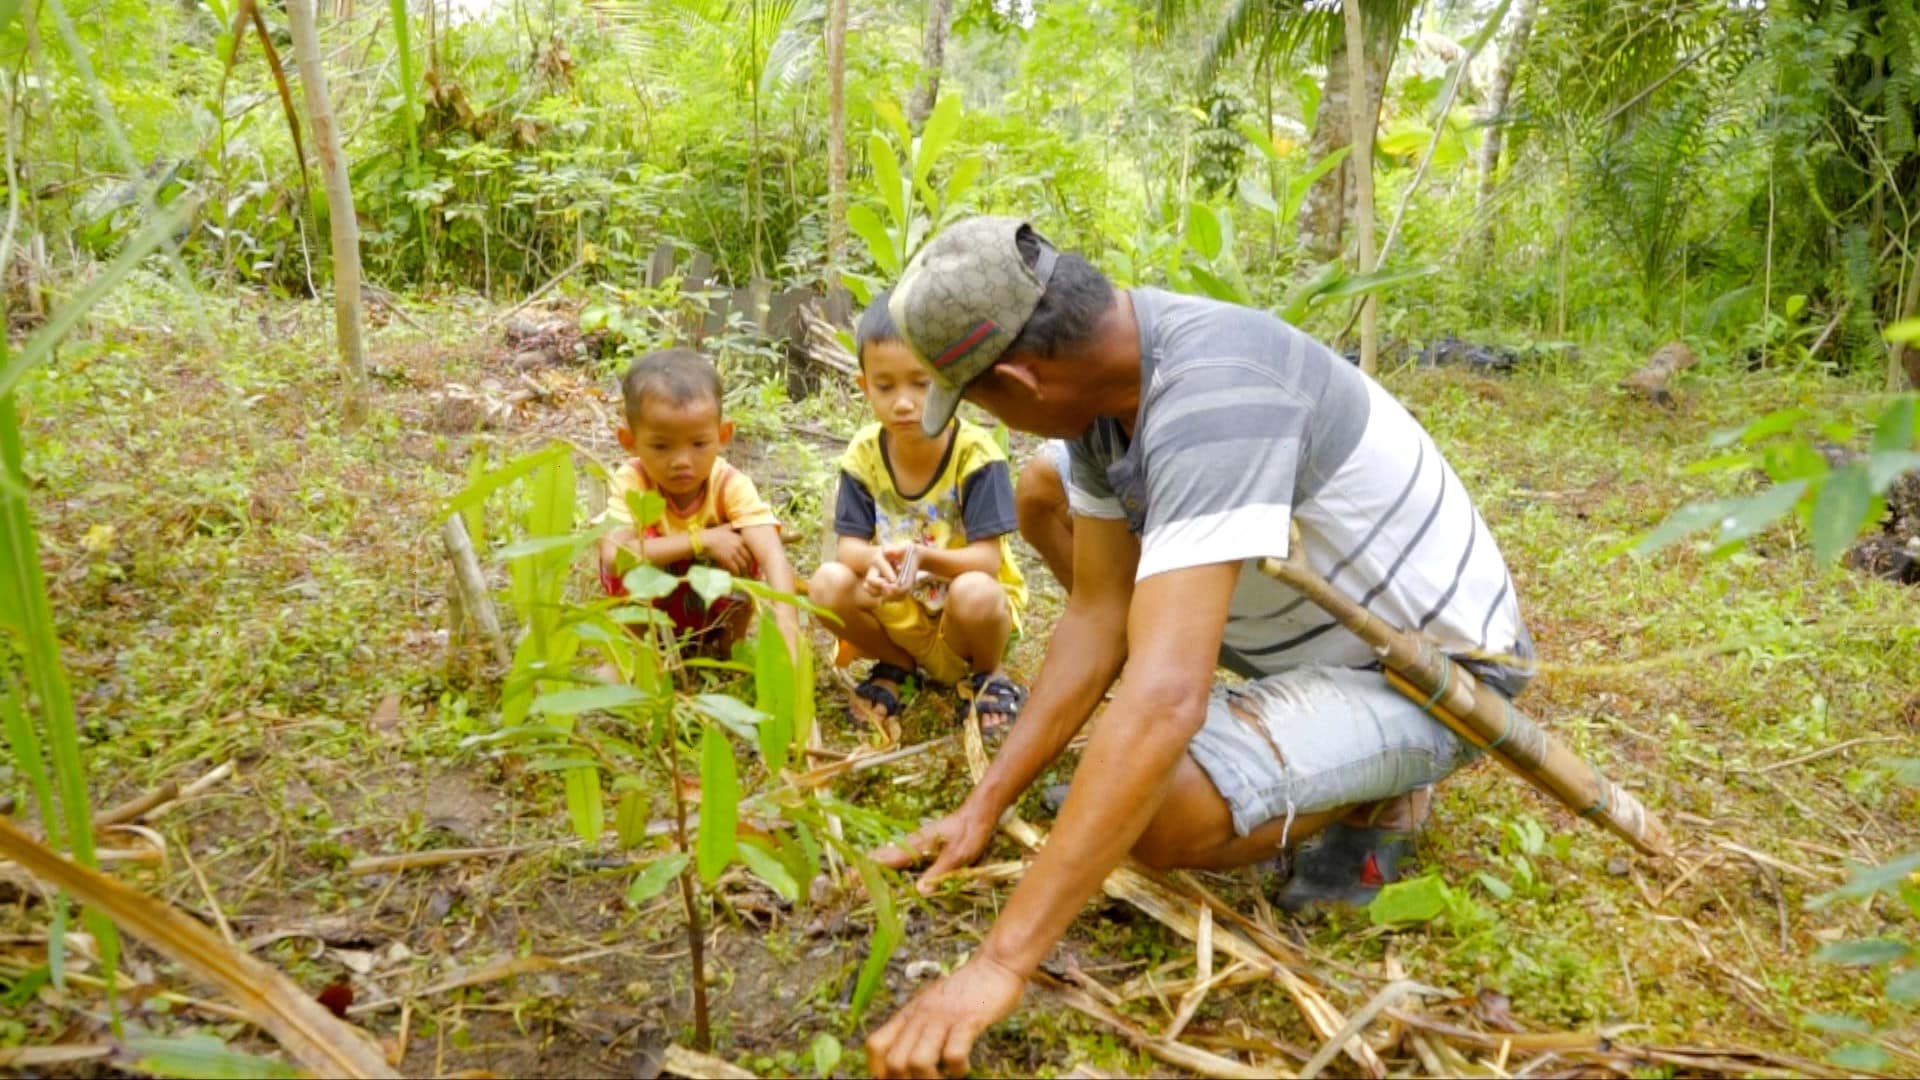 Pasihan shows his two children a young durian plant